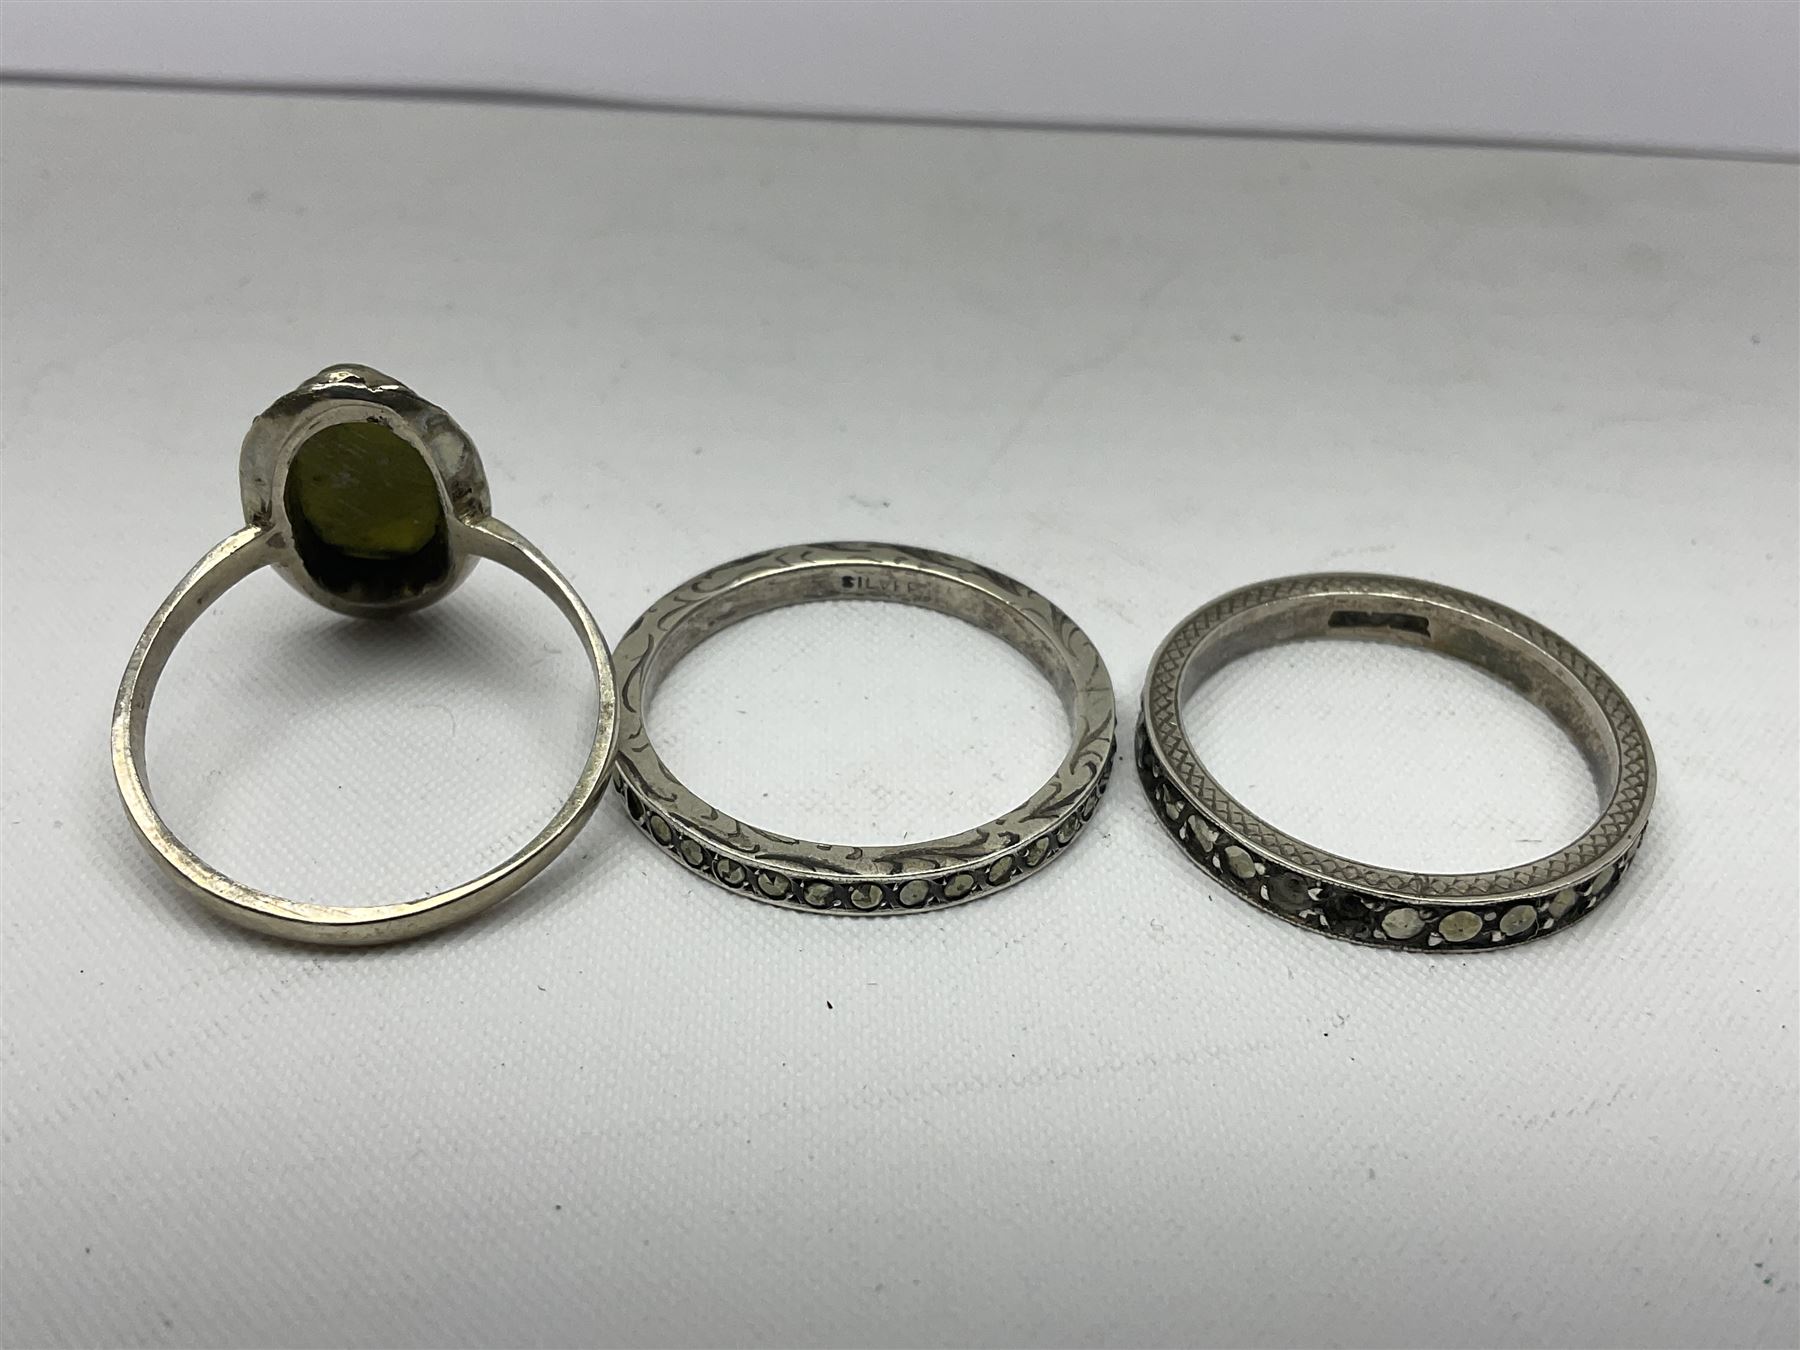 Silver fob watch and three silver rings - Image 3 of 11